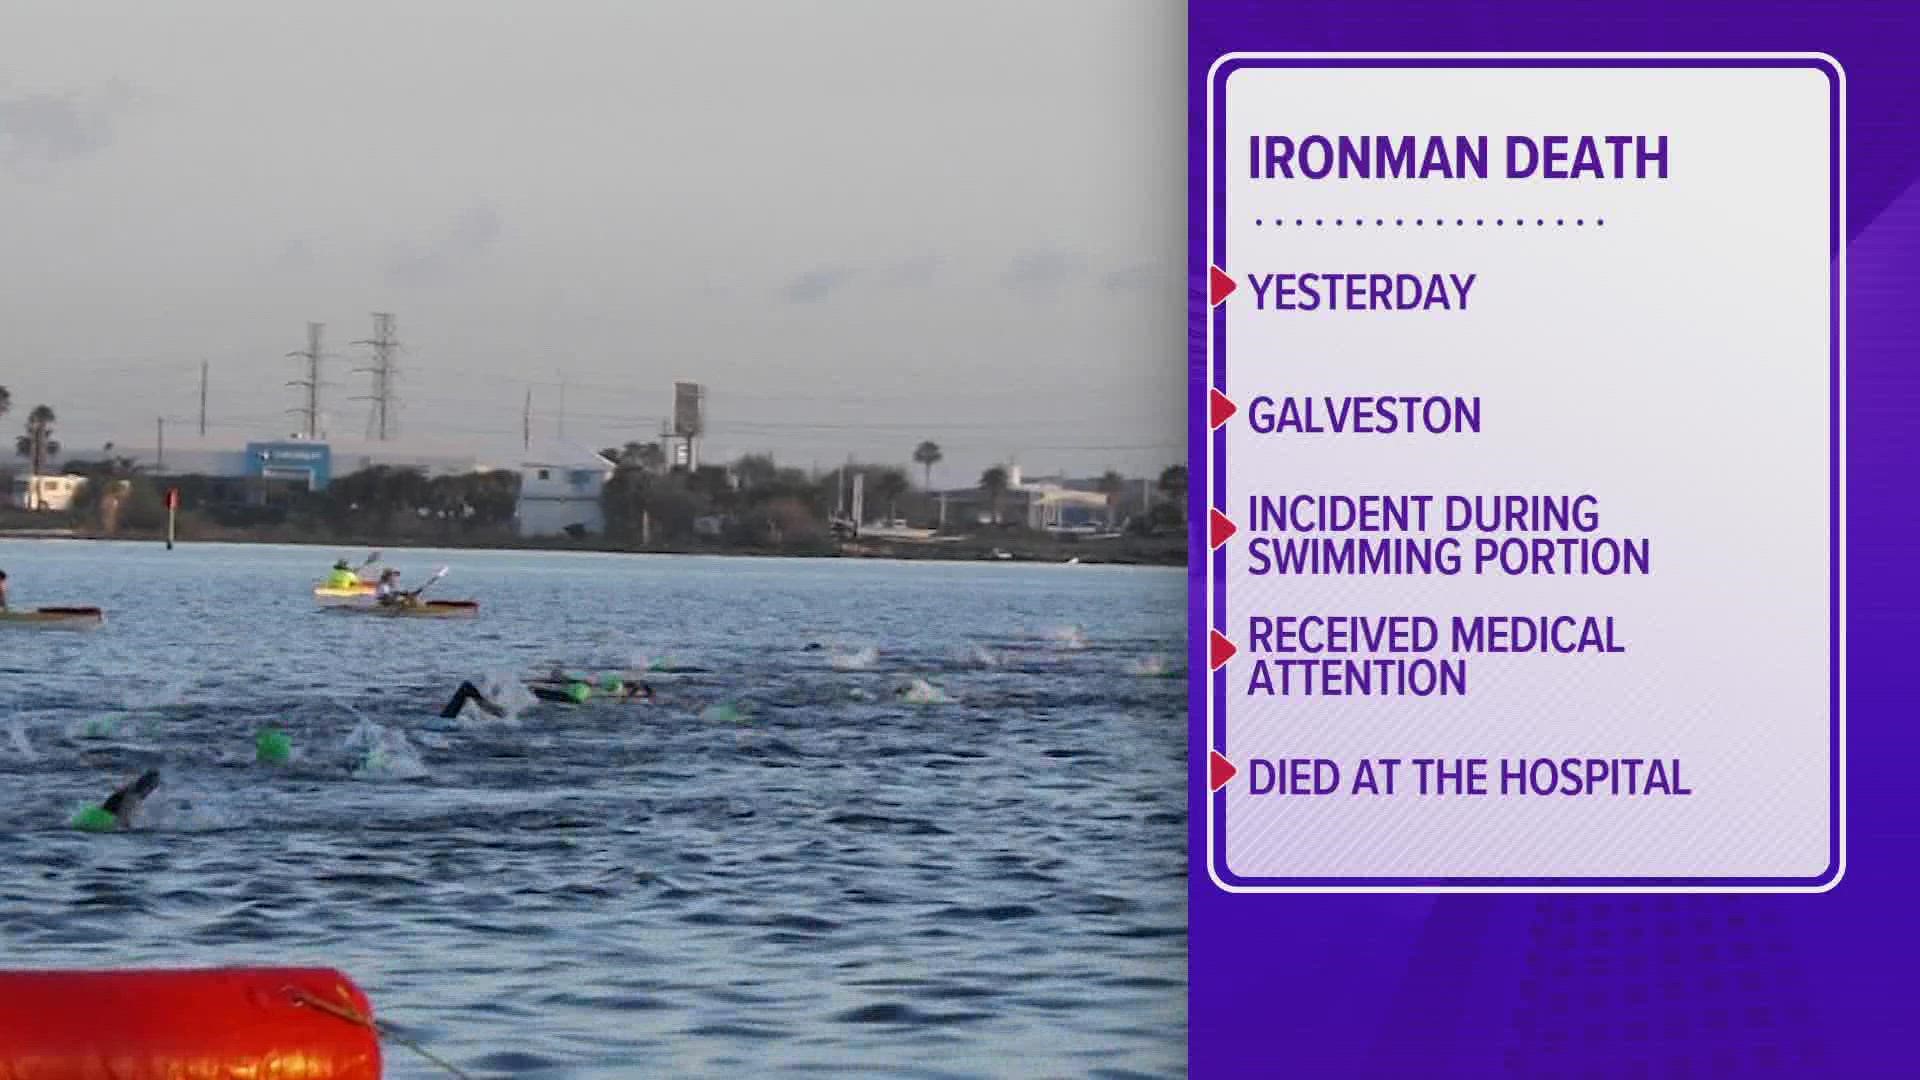 An athlete died this weekend after participating in the 2022 IRONMAN Texas triathlon in Galveston, according to the event's Facebook page.